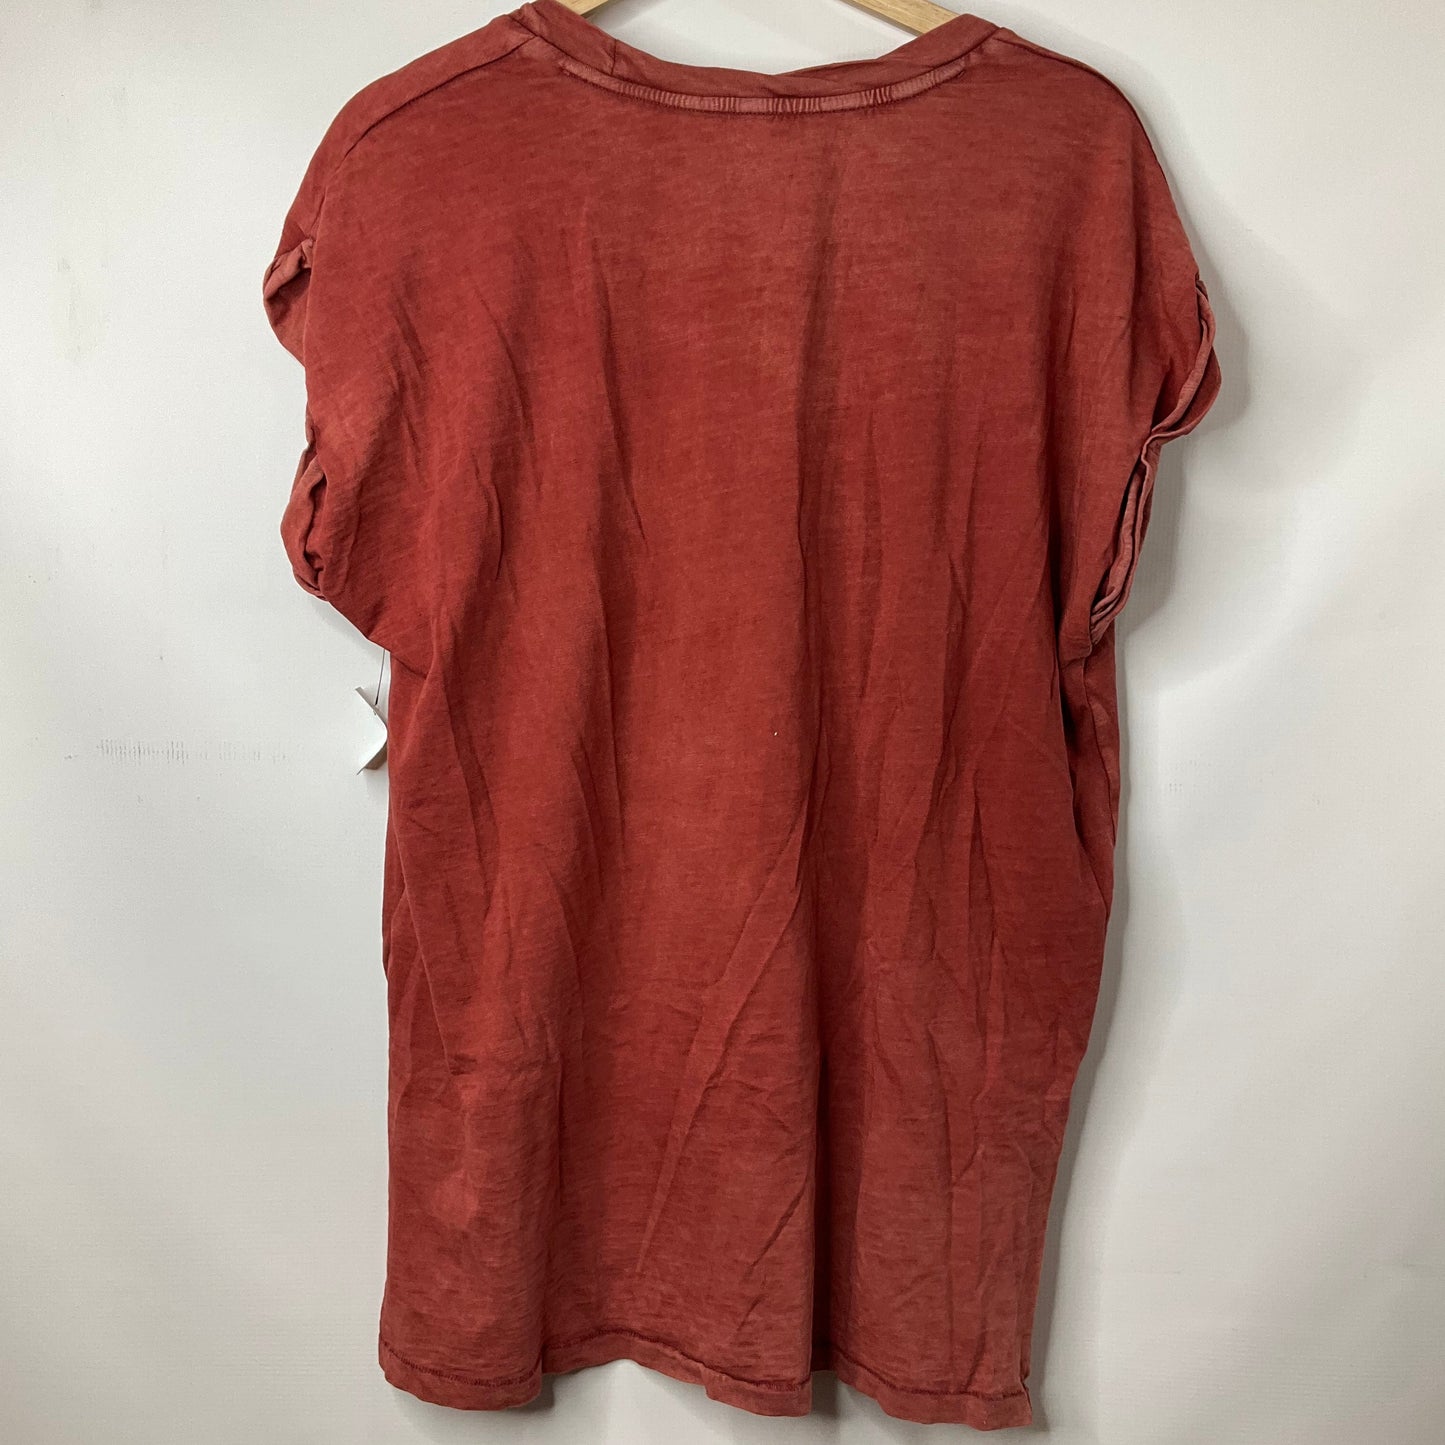 Red Top Short Sleeve Aerie, Size M